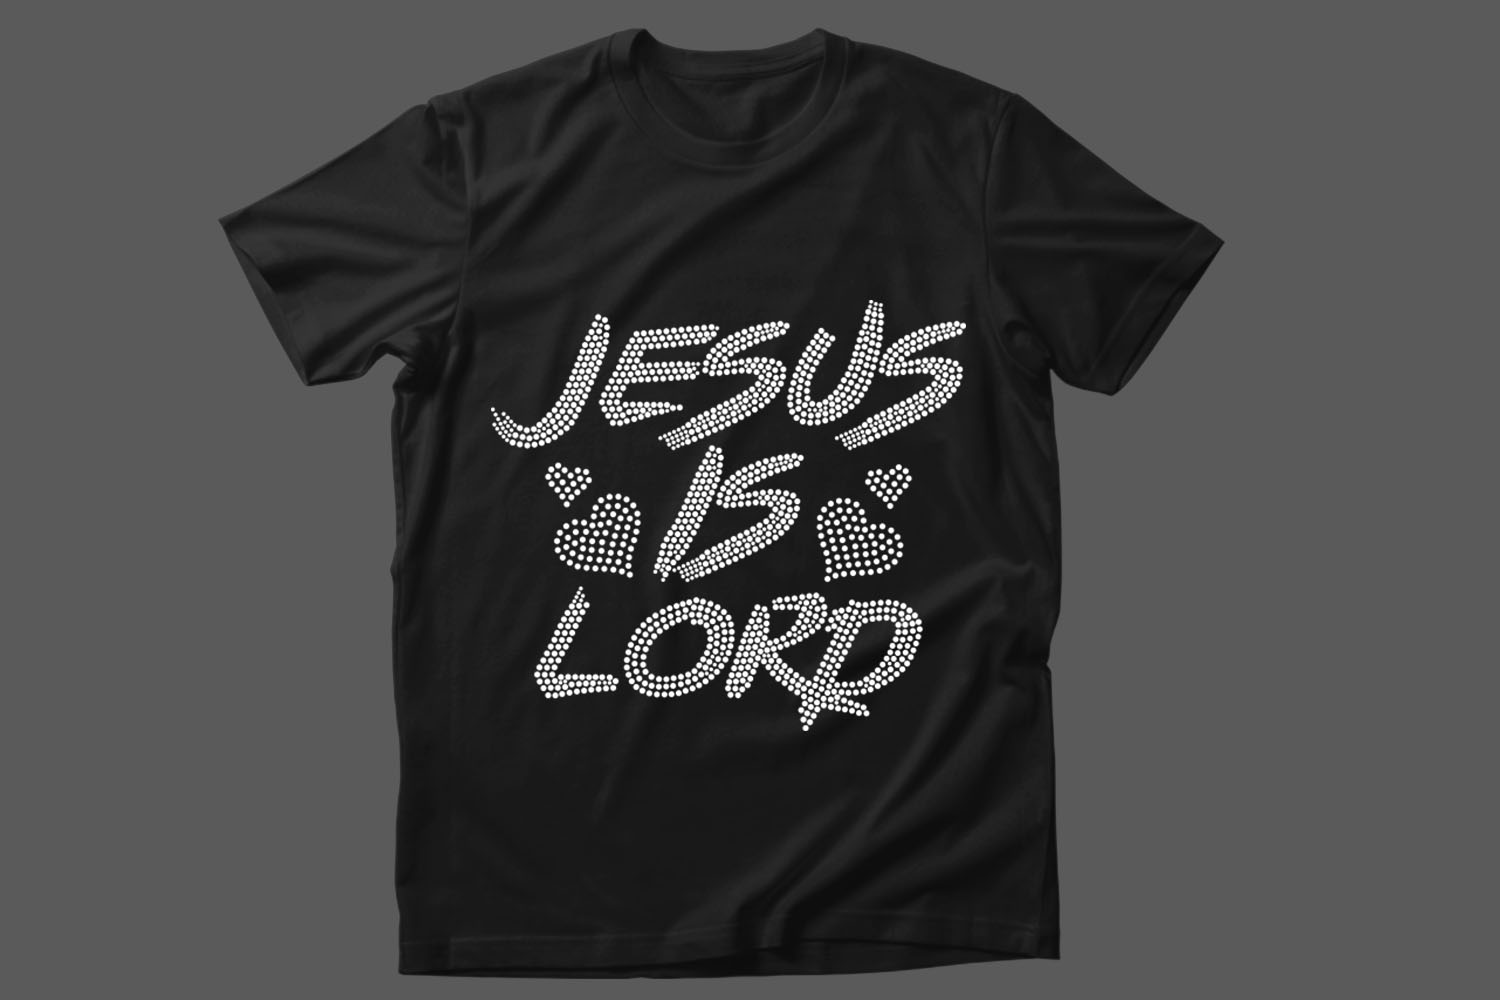 Image of a black t-shirt with amazing Jesus Is Lord lettering